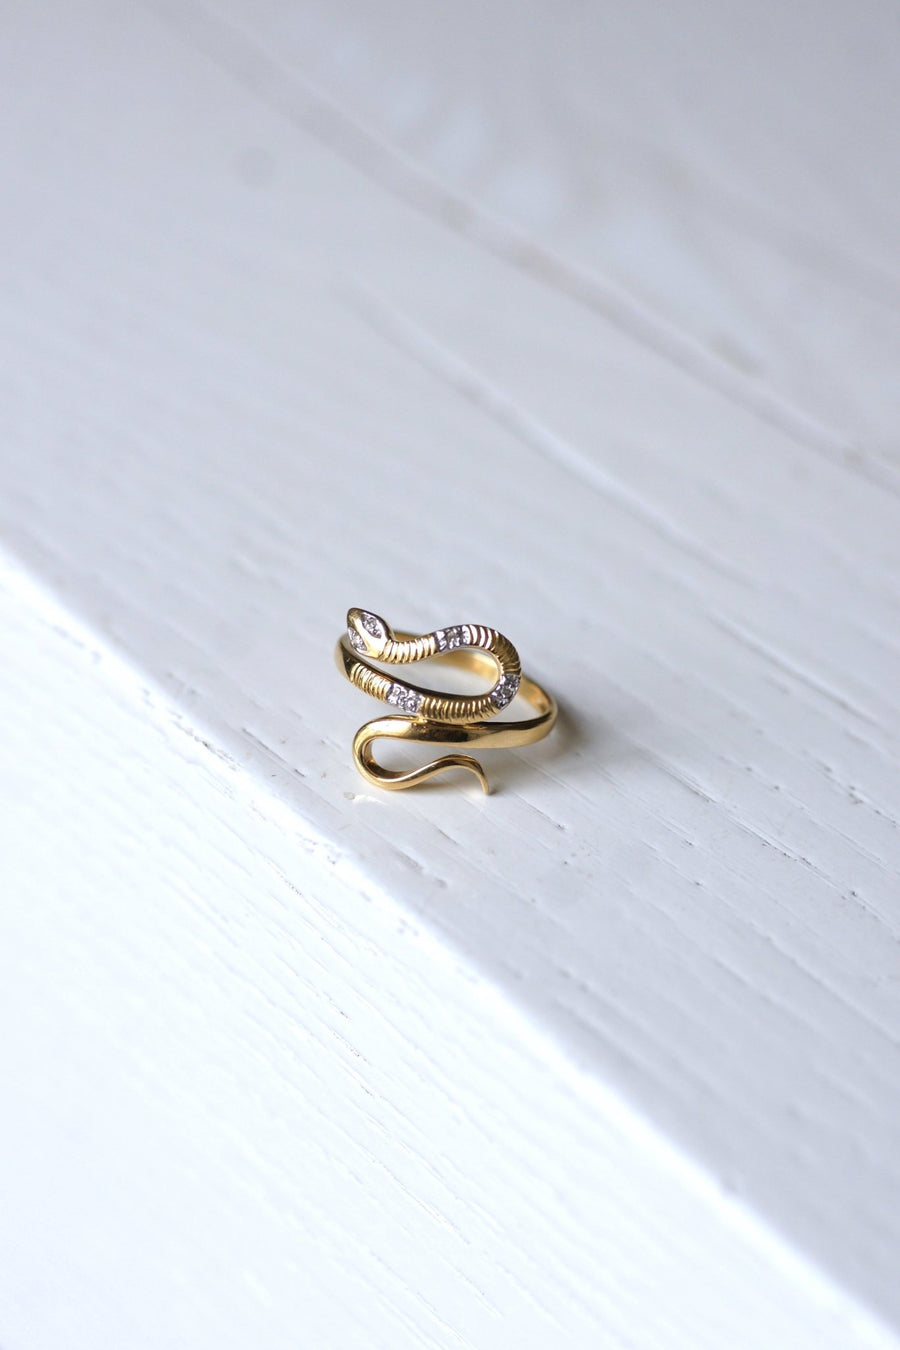 Vintage two gold and diamond snake ring - Penelope Gallery